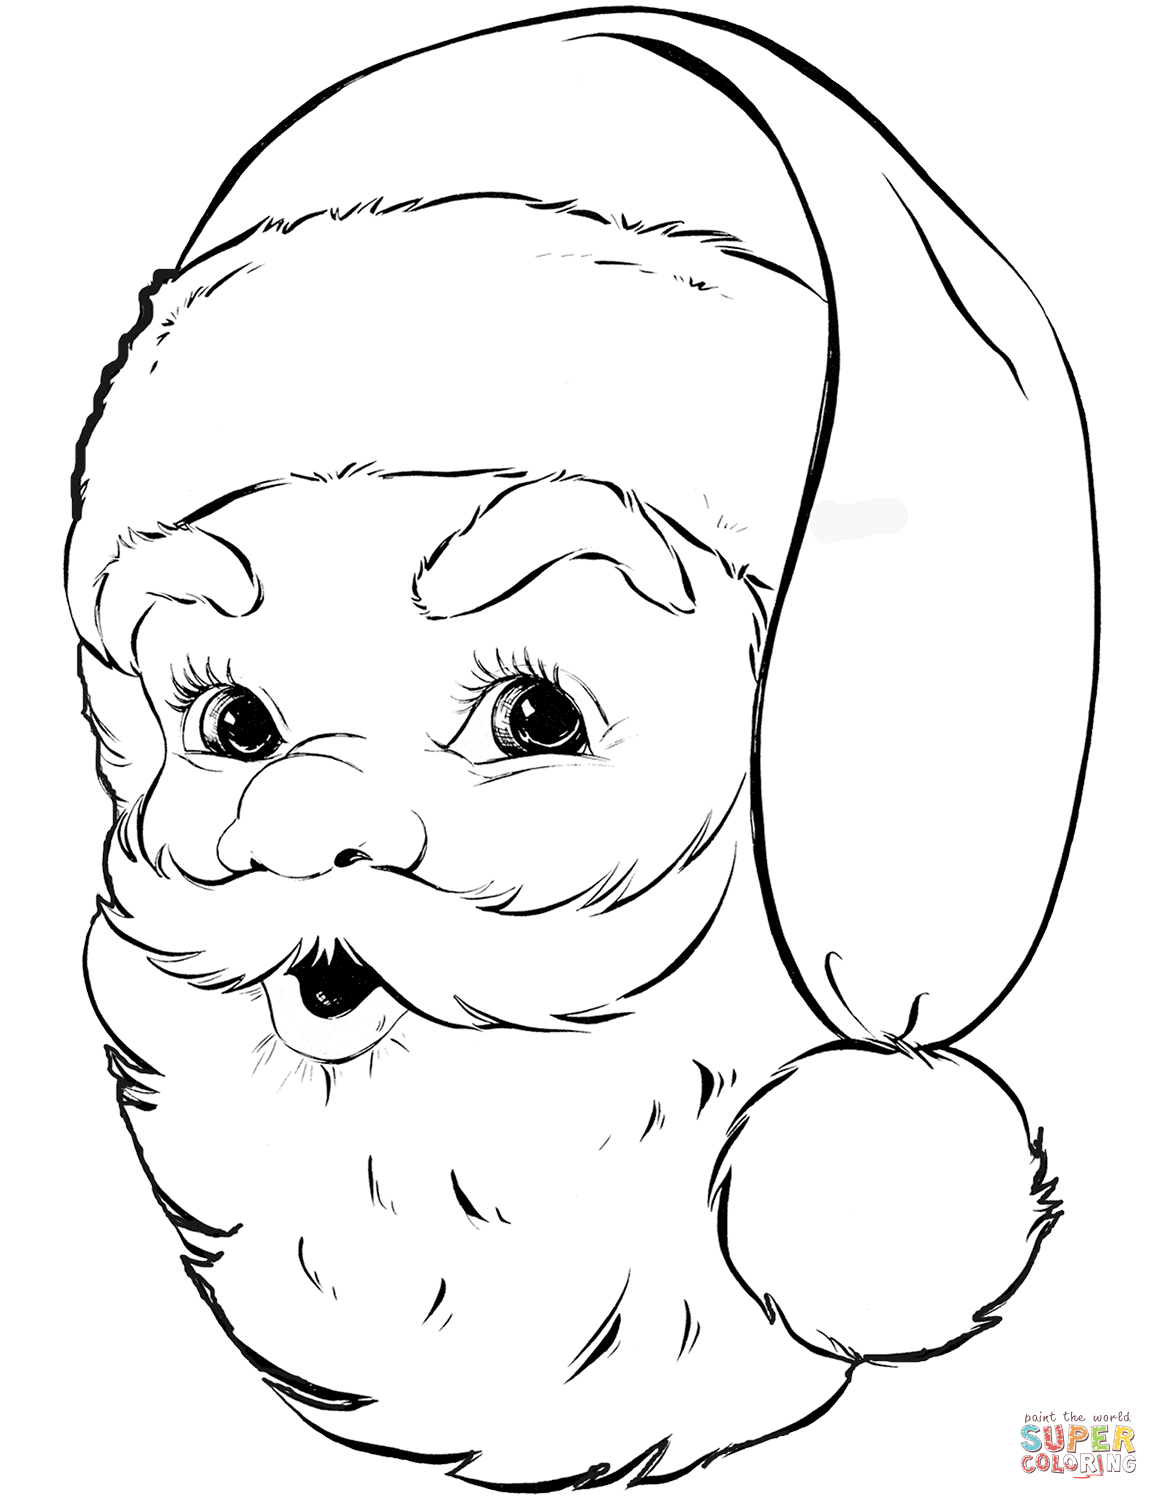 Santa Claus Coloring Pages | Free Coloring Pages - Santa Coloring Pages Printable Free